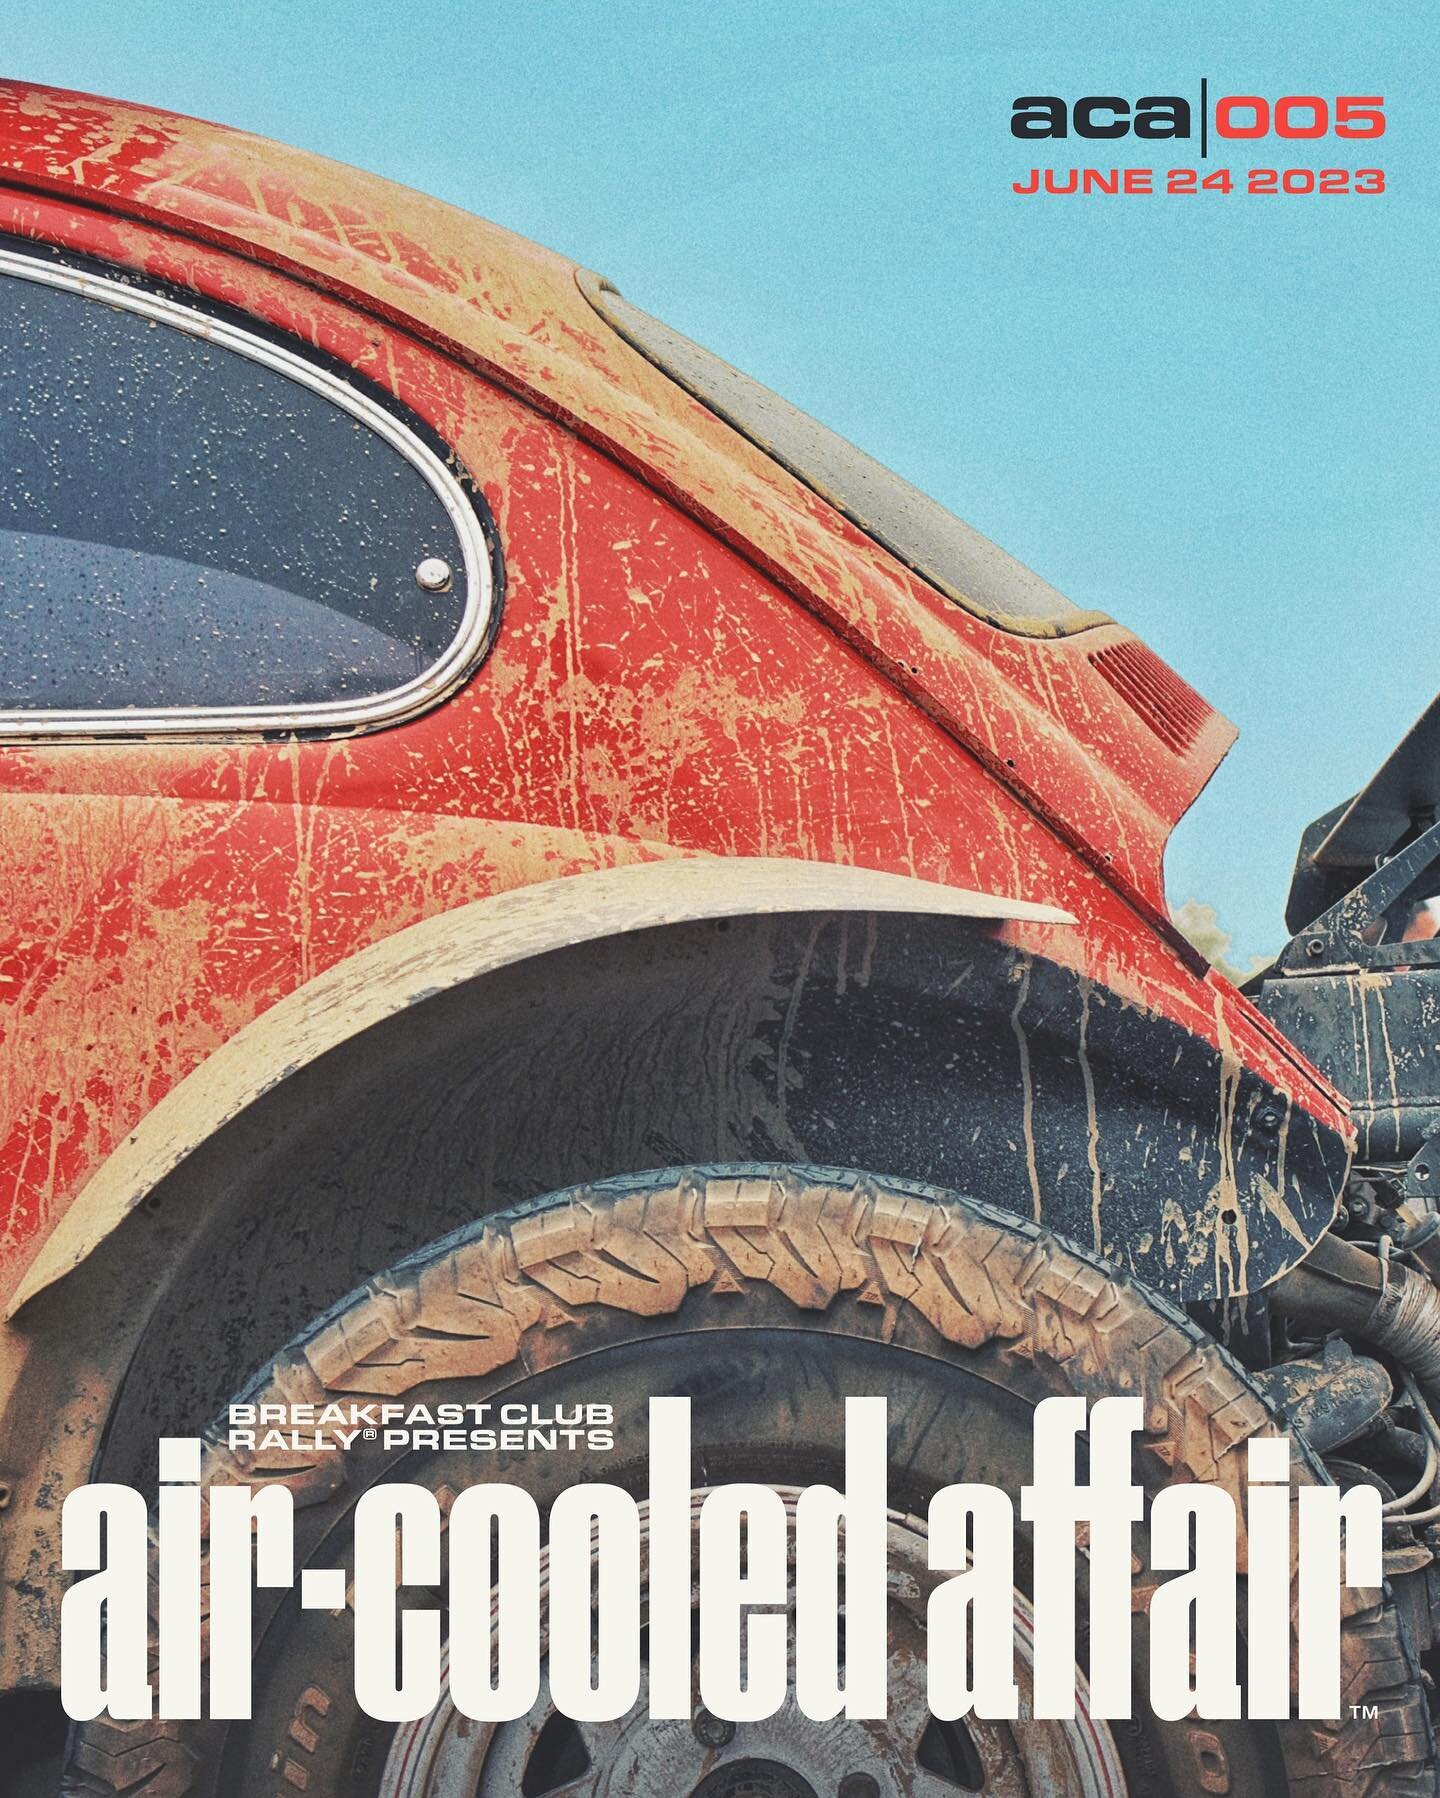 Porsches, but not just Porsches. Air-Cooled Affair returns Saturday, June 24th, 2023 for round 005.

ACA | 005 is a special limited-capacity event focused exclusively on vehicles powered by air-cooled engines from Porsche and other manufacturers (VW,